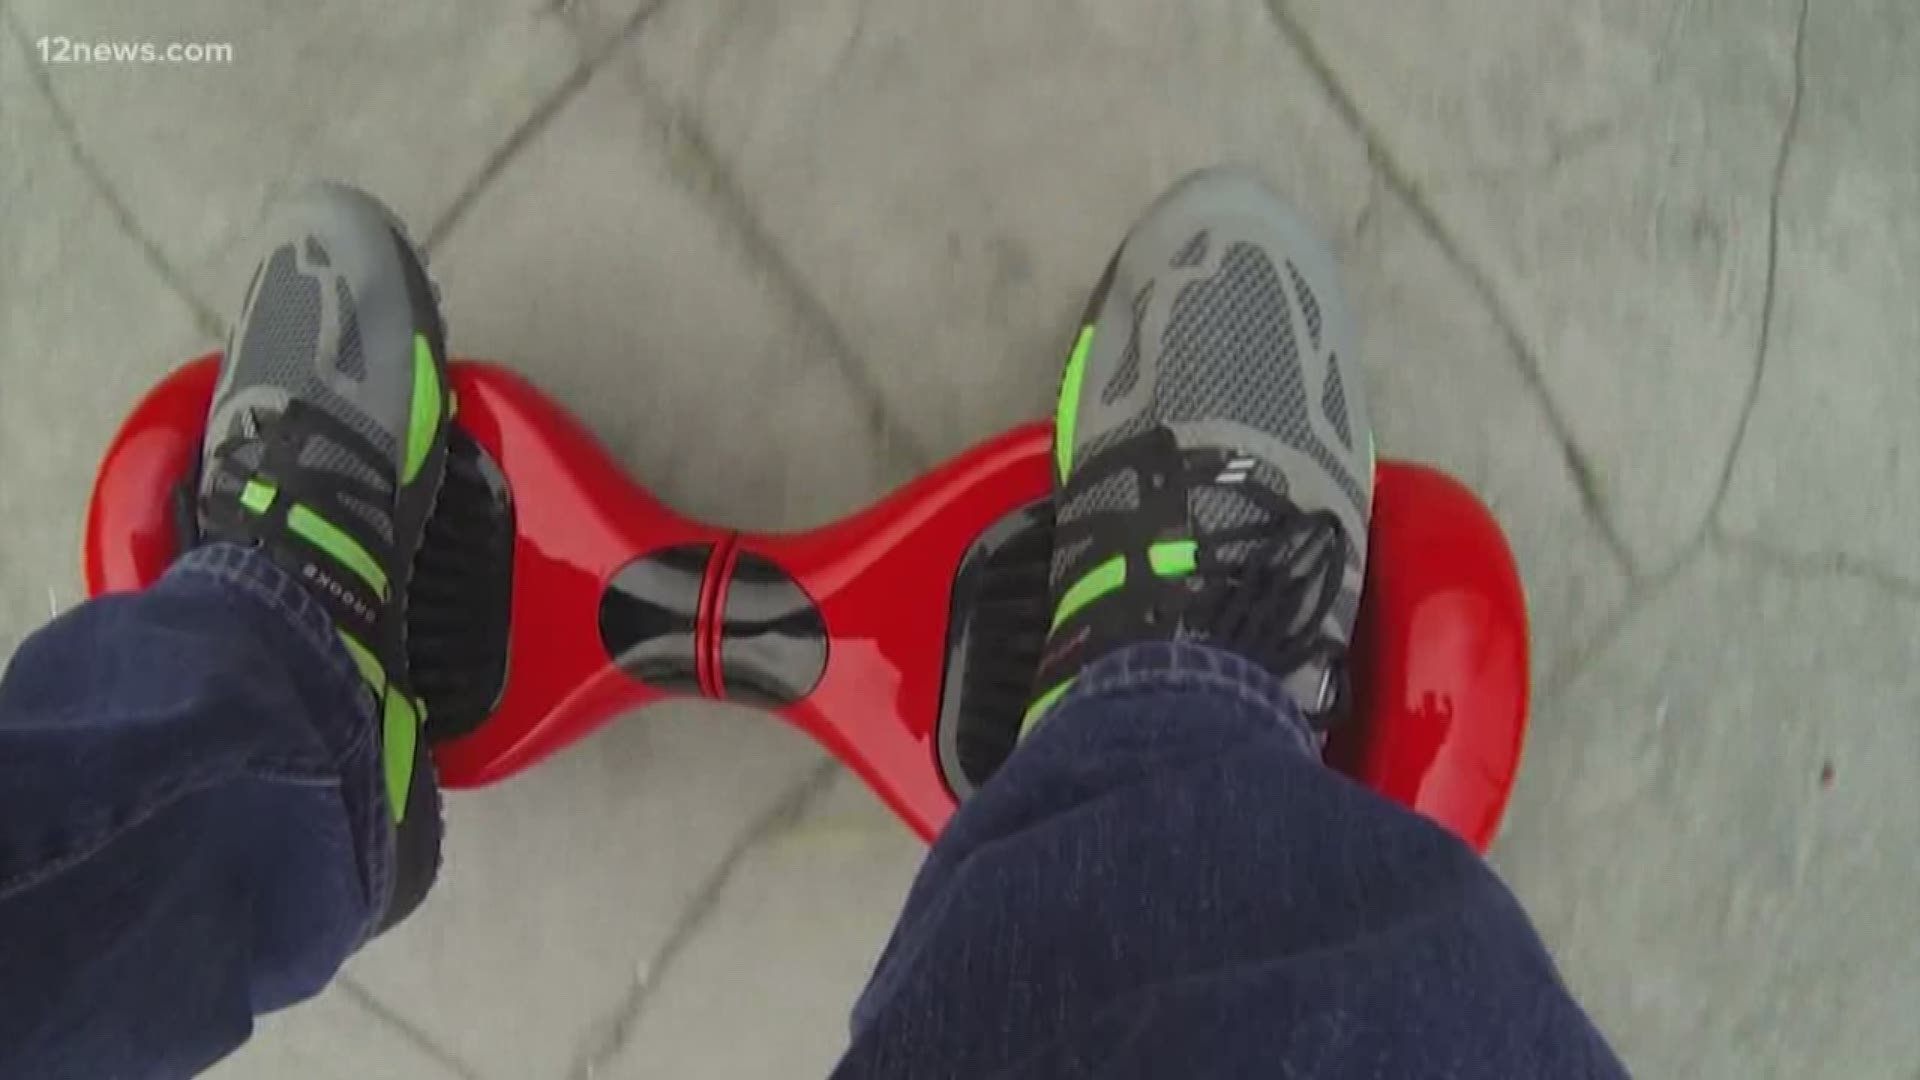 Researchers reveal nearly 27,000 kids were treated for hoverboard inhuries during the first 2 years they were sold in the U.S. Broken bones and sprains accounted for more than half the injuries.